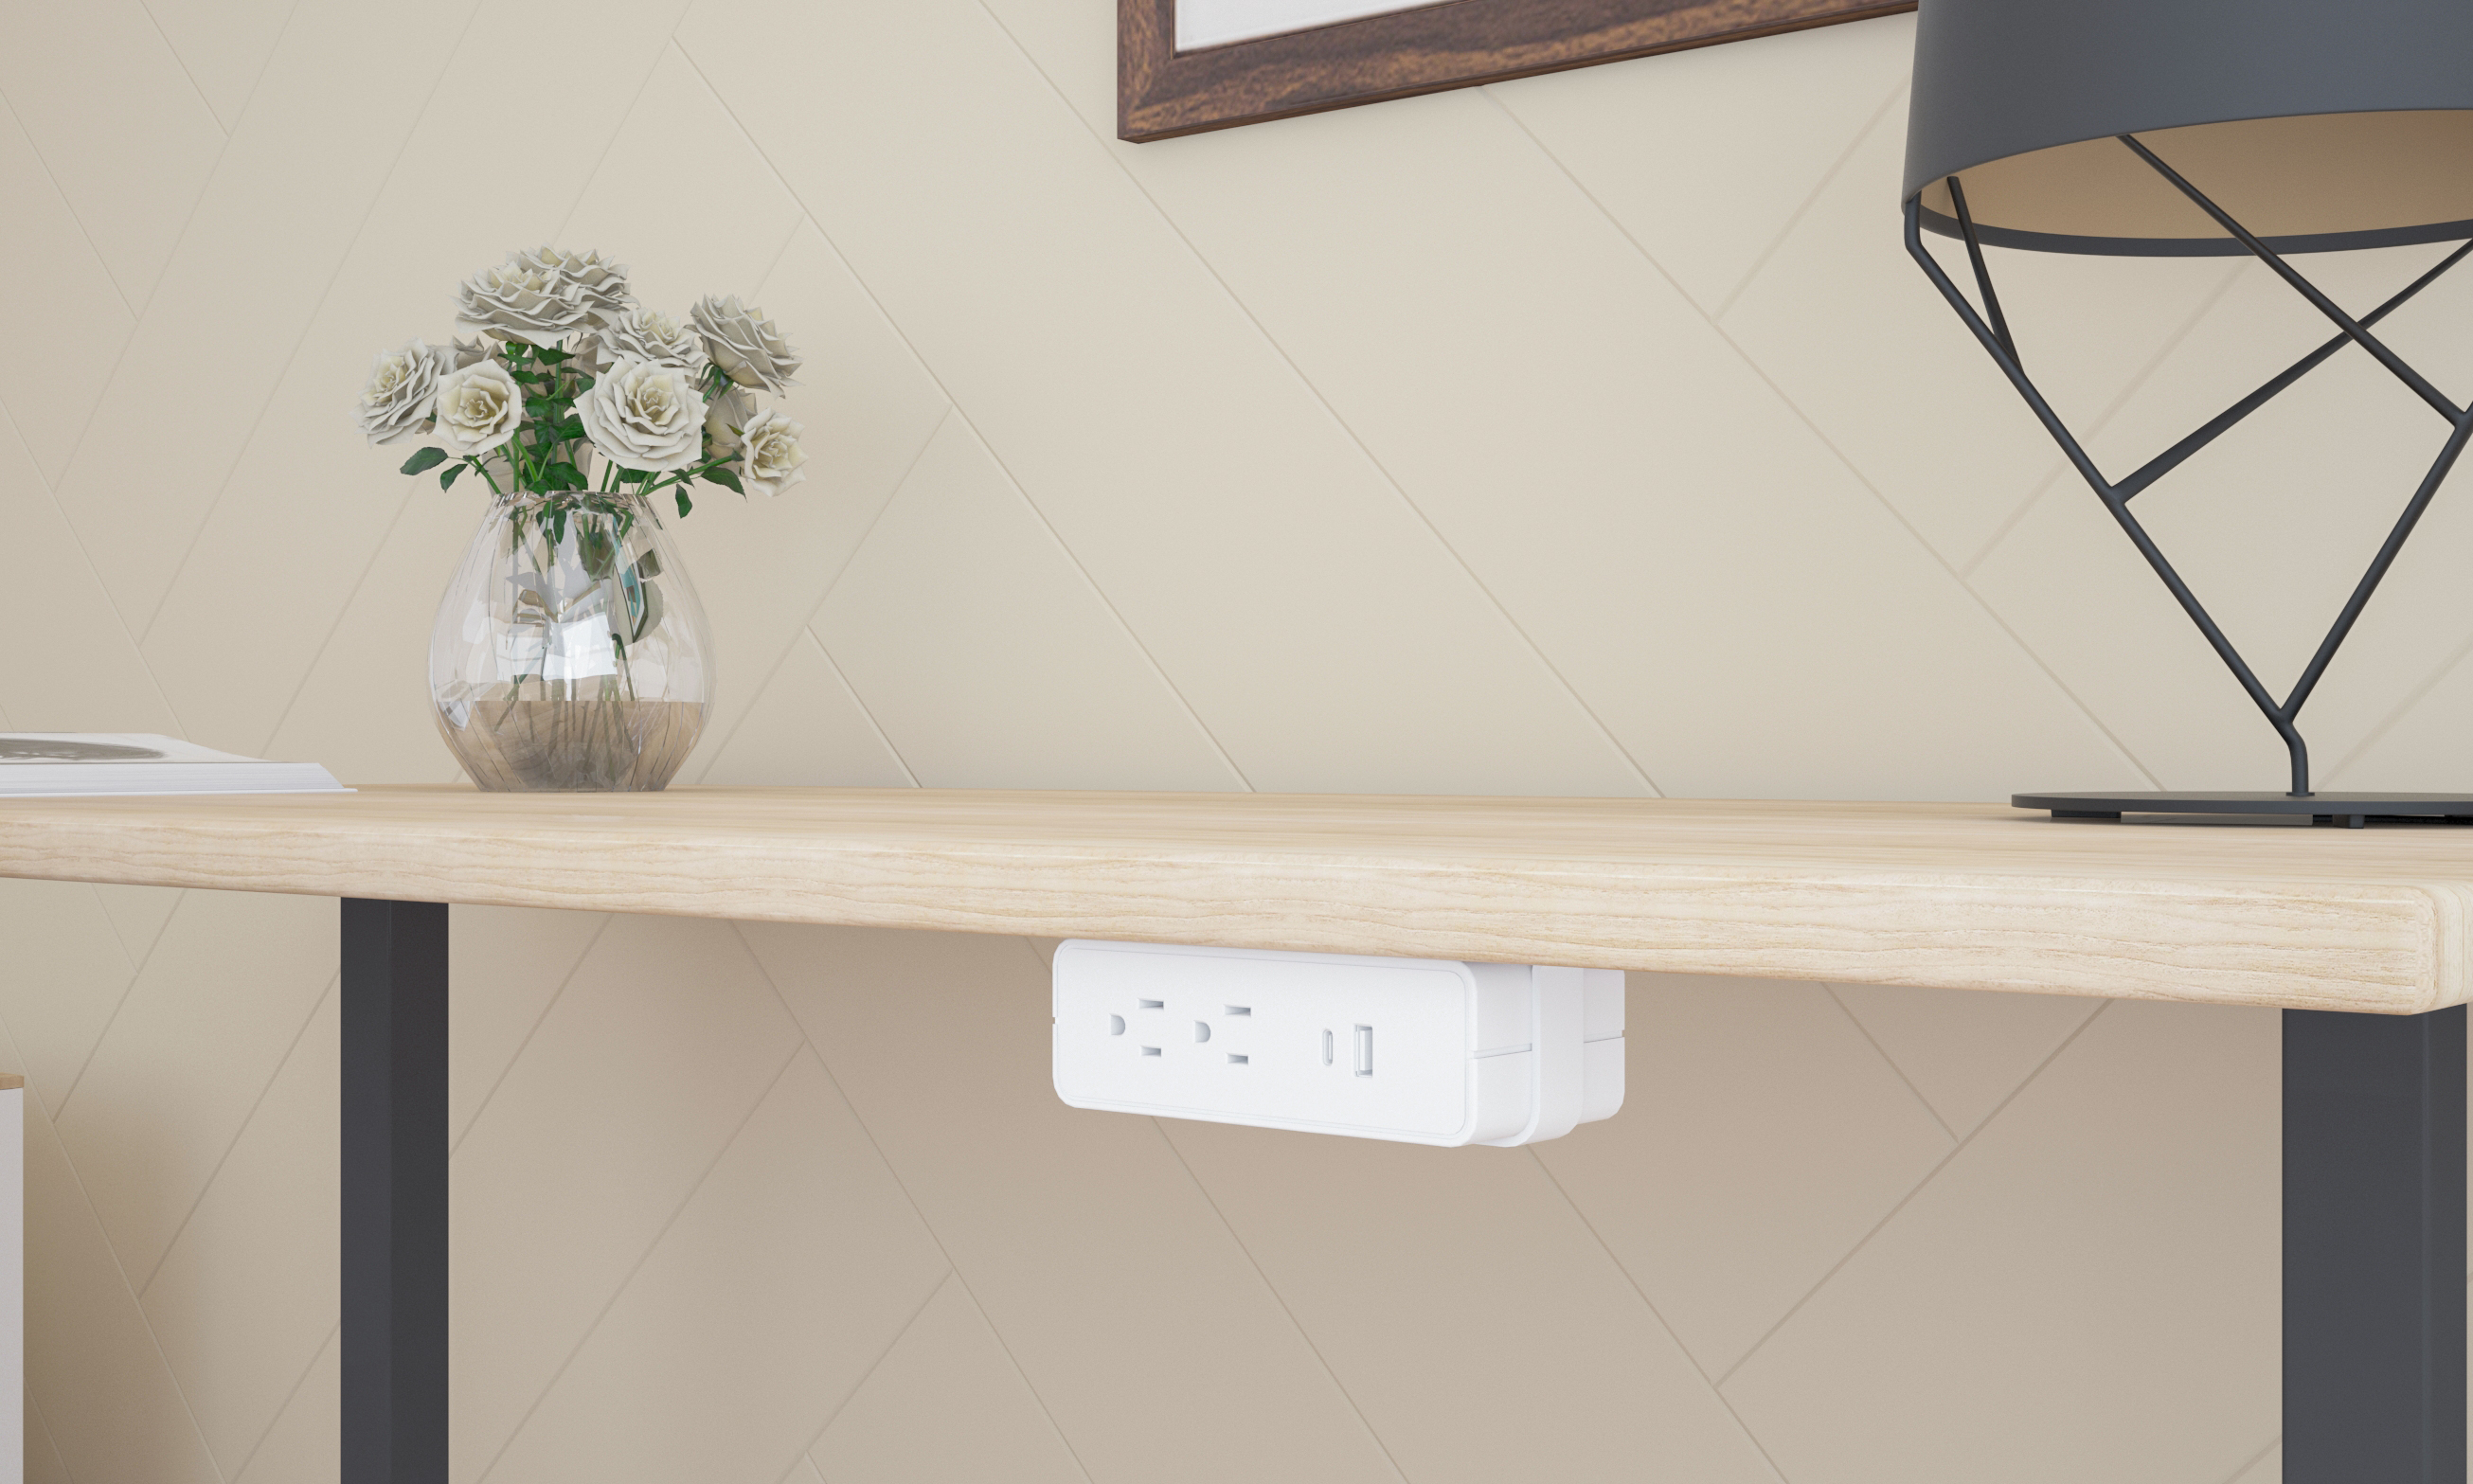 What Customizable Options Are Available for Under Desk Power Sockets in Modern Offices?